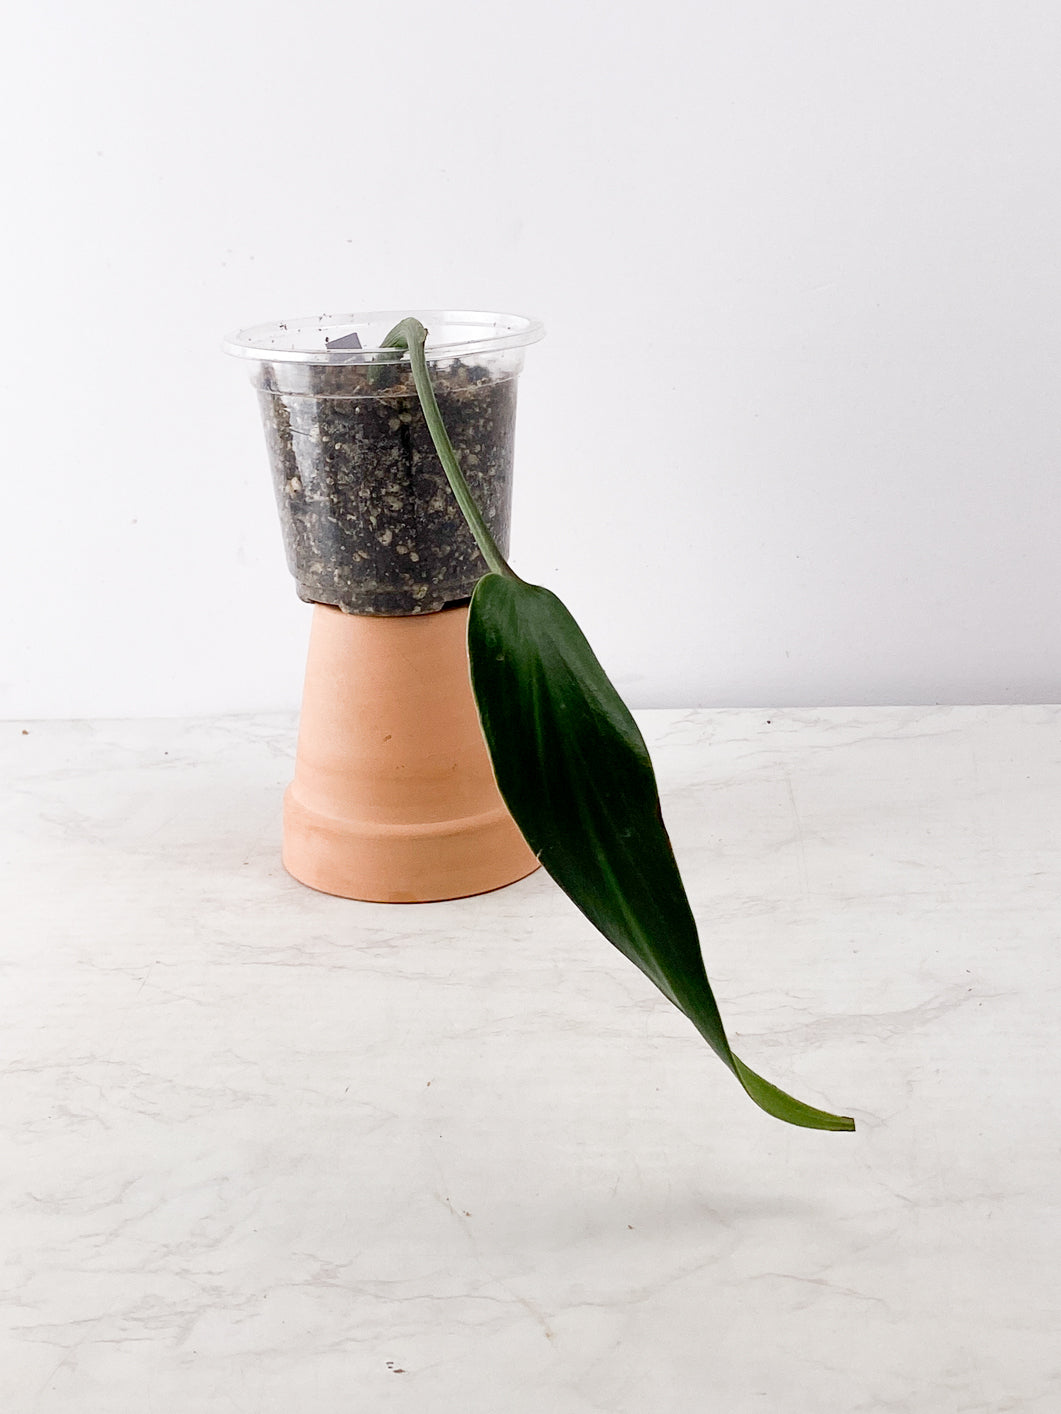 Private Sale: Monstera Burle Marx flame rooting 1 leaf 1 bud slightly rooted